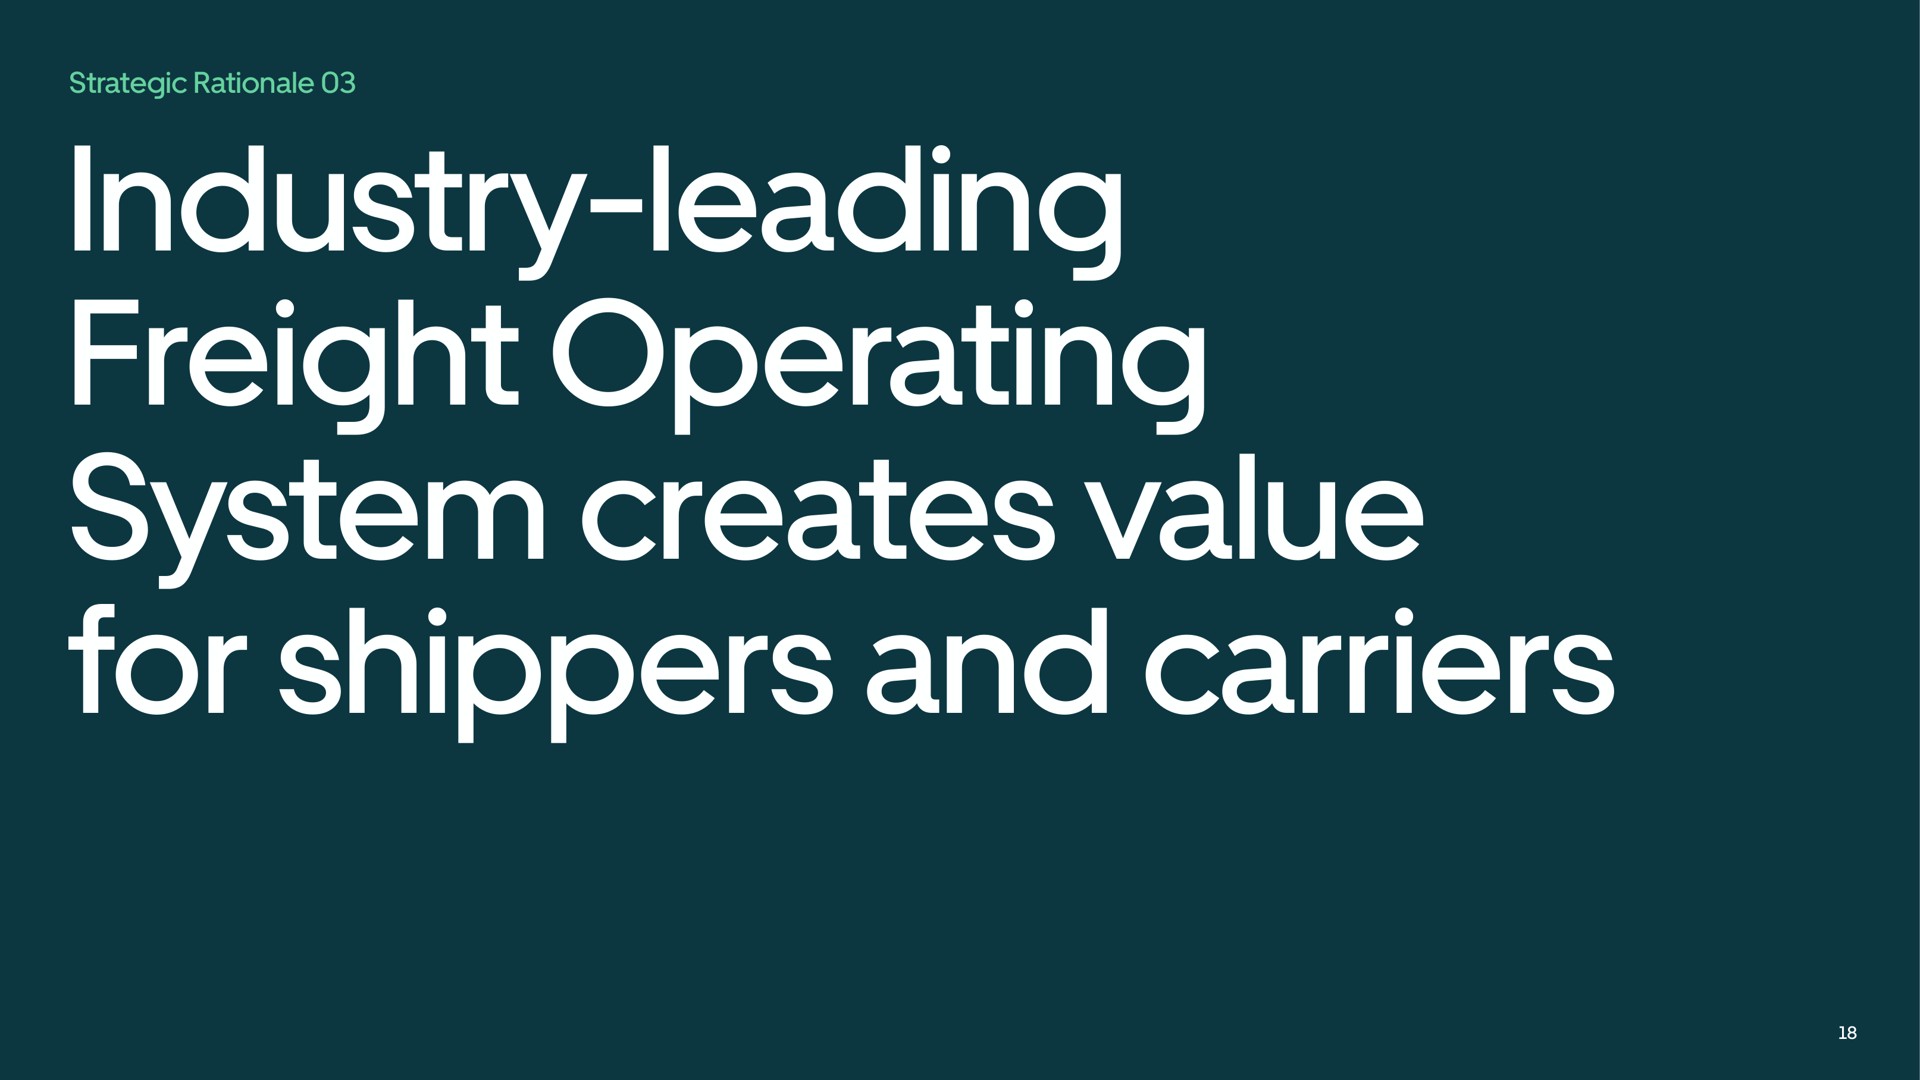 industry leading freight operating system creates value for shippers and carriers vas a rocs | Uber